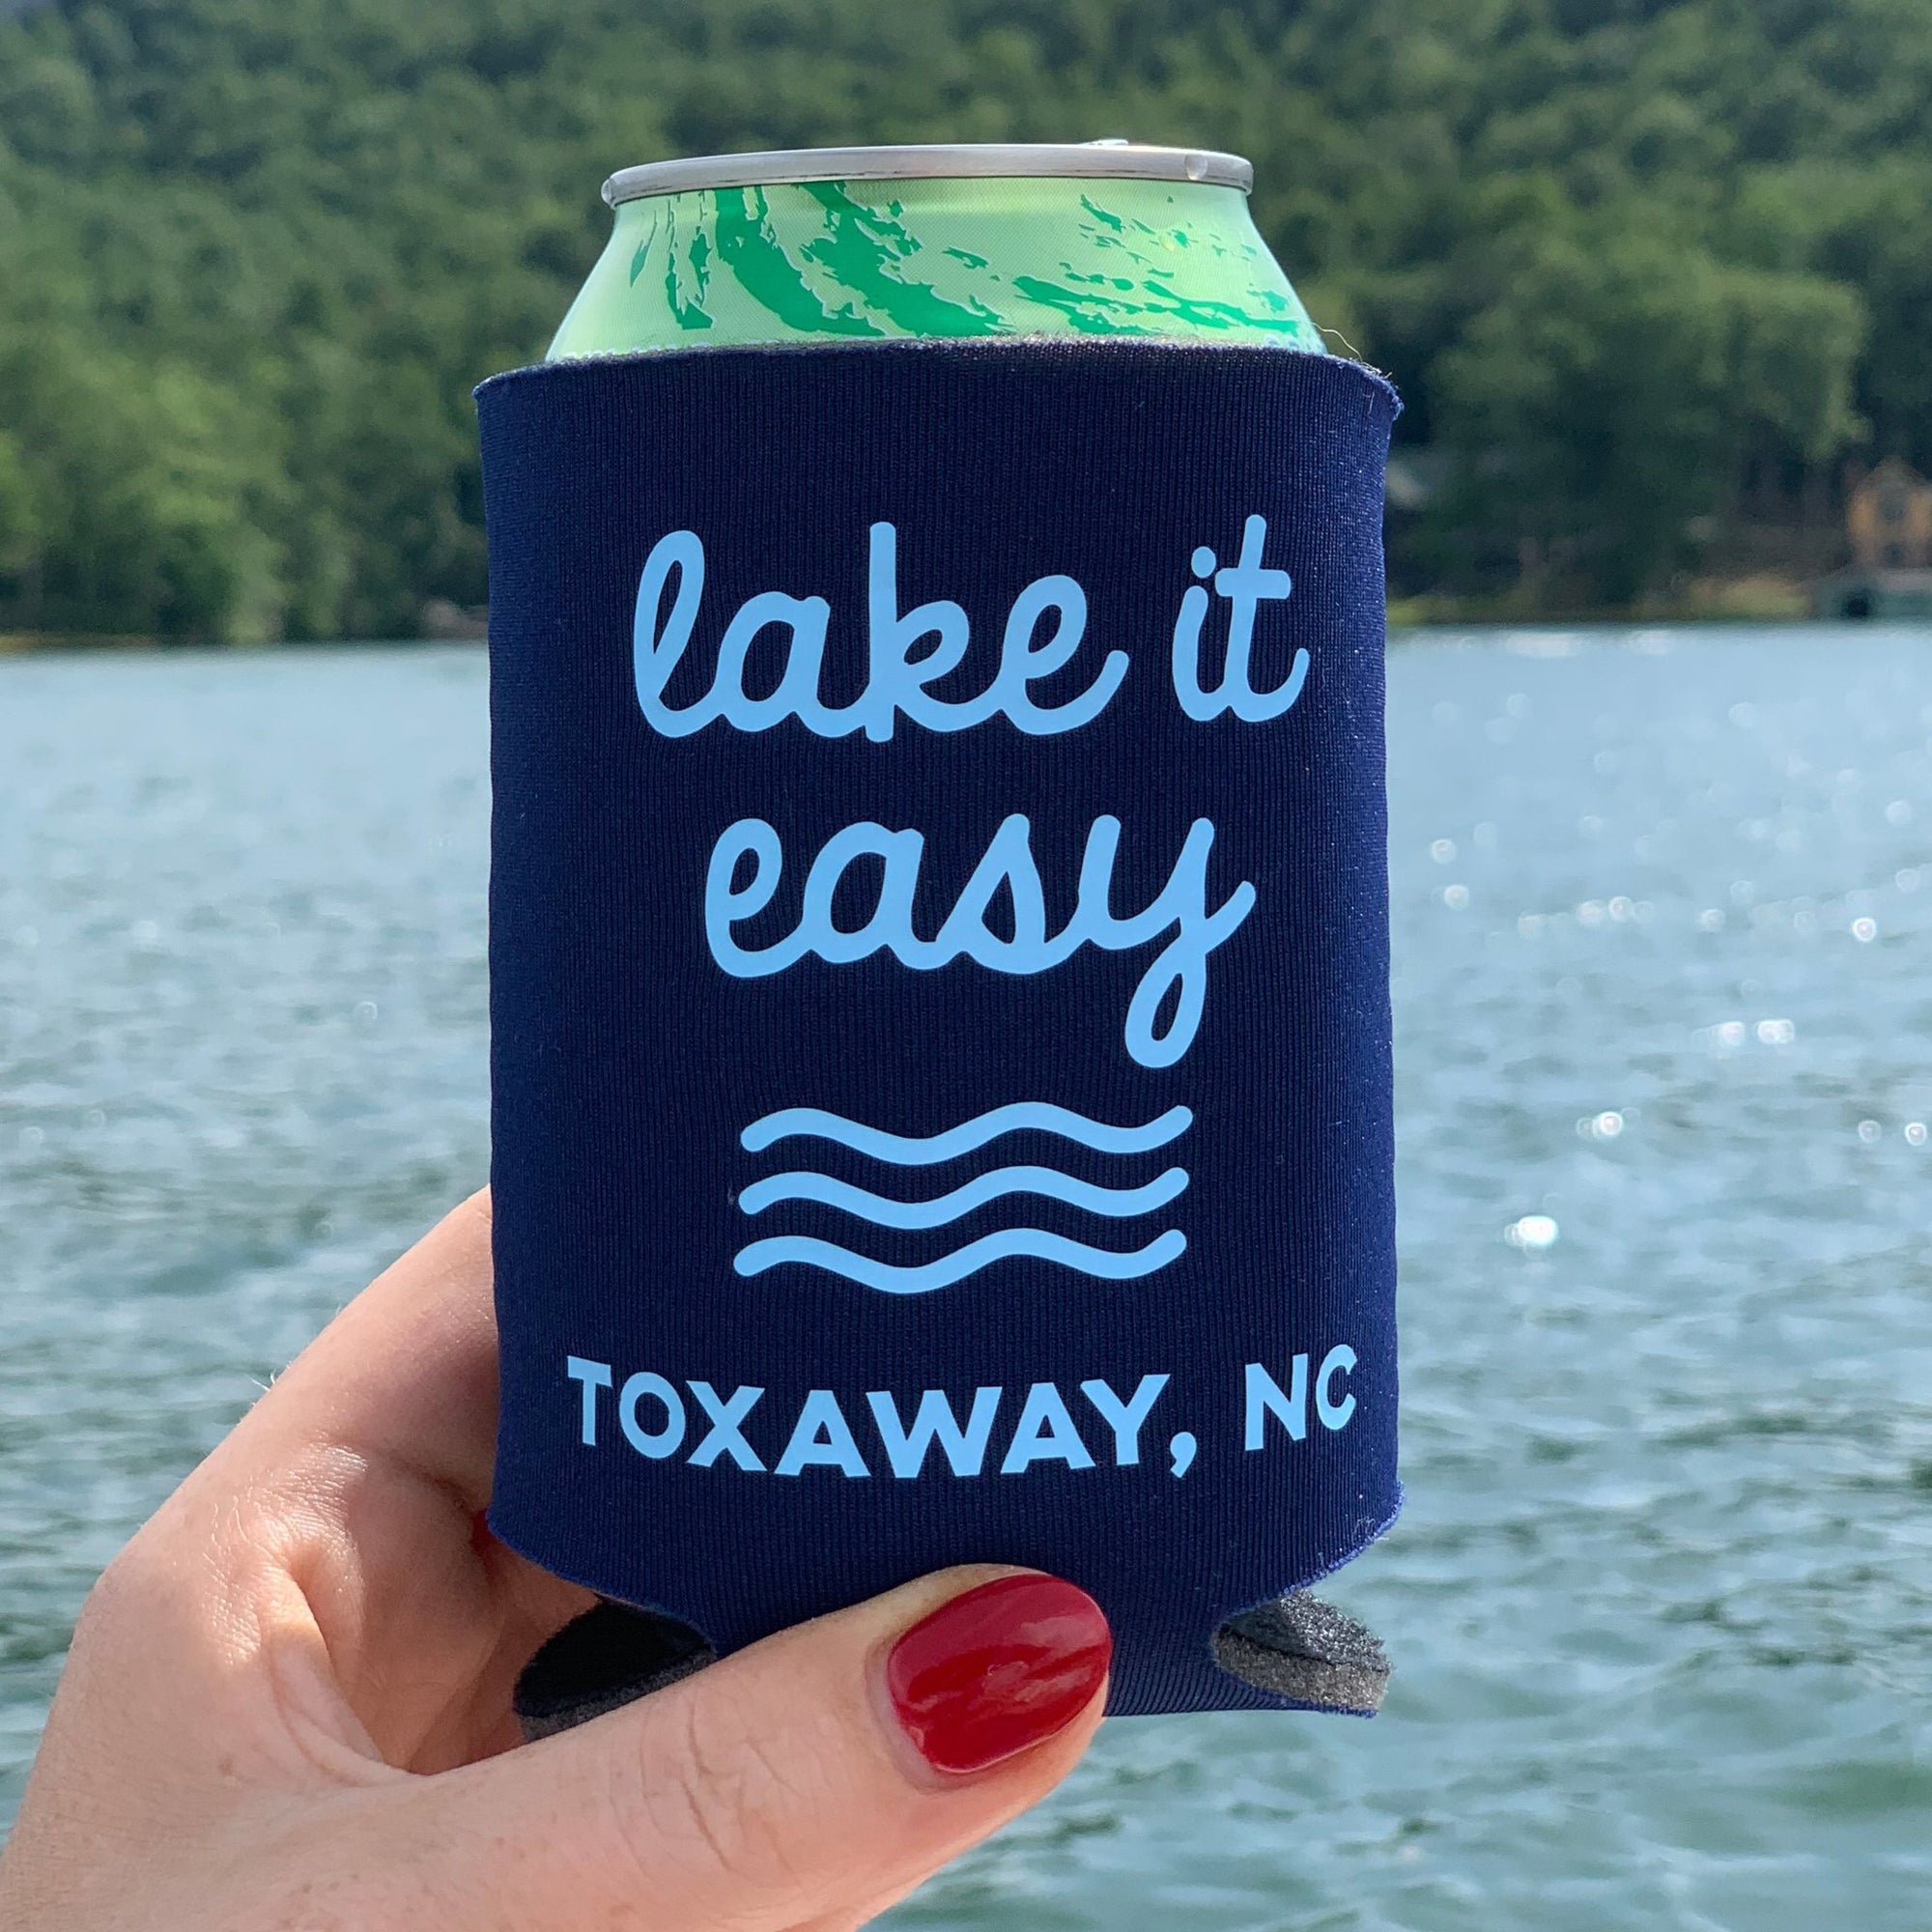 A person holds up a navy koozie which reads "lake it easy" and is customized with the city Toxaway, NC.